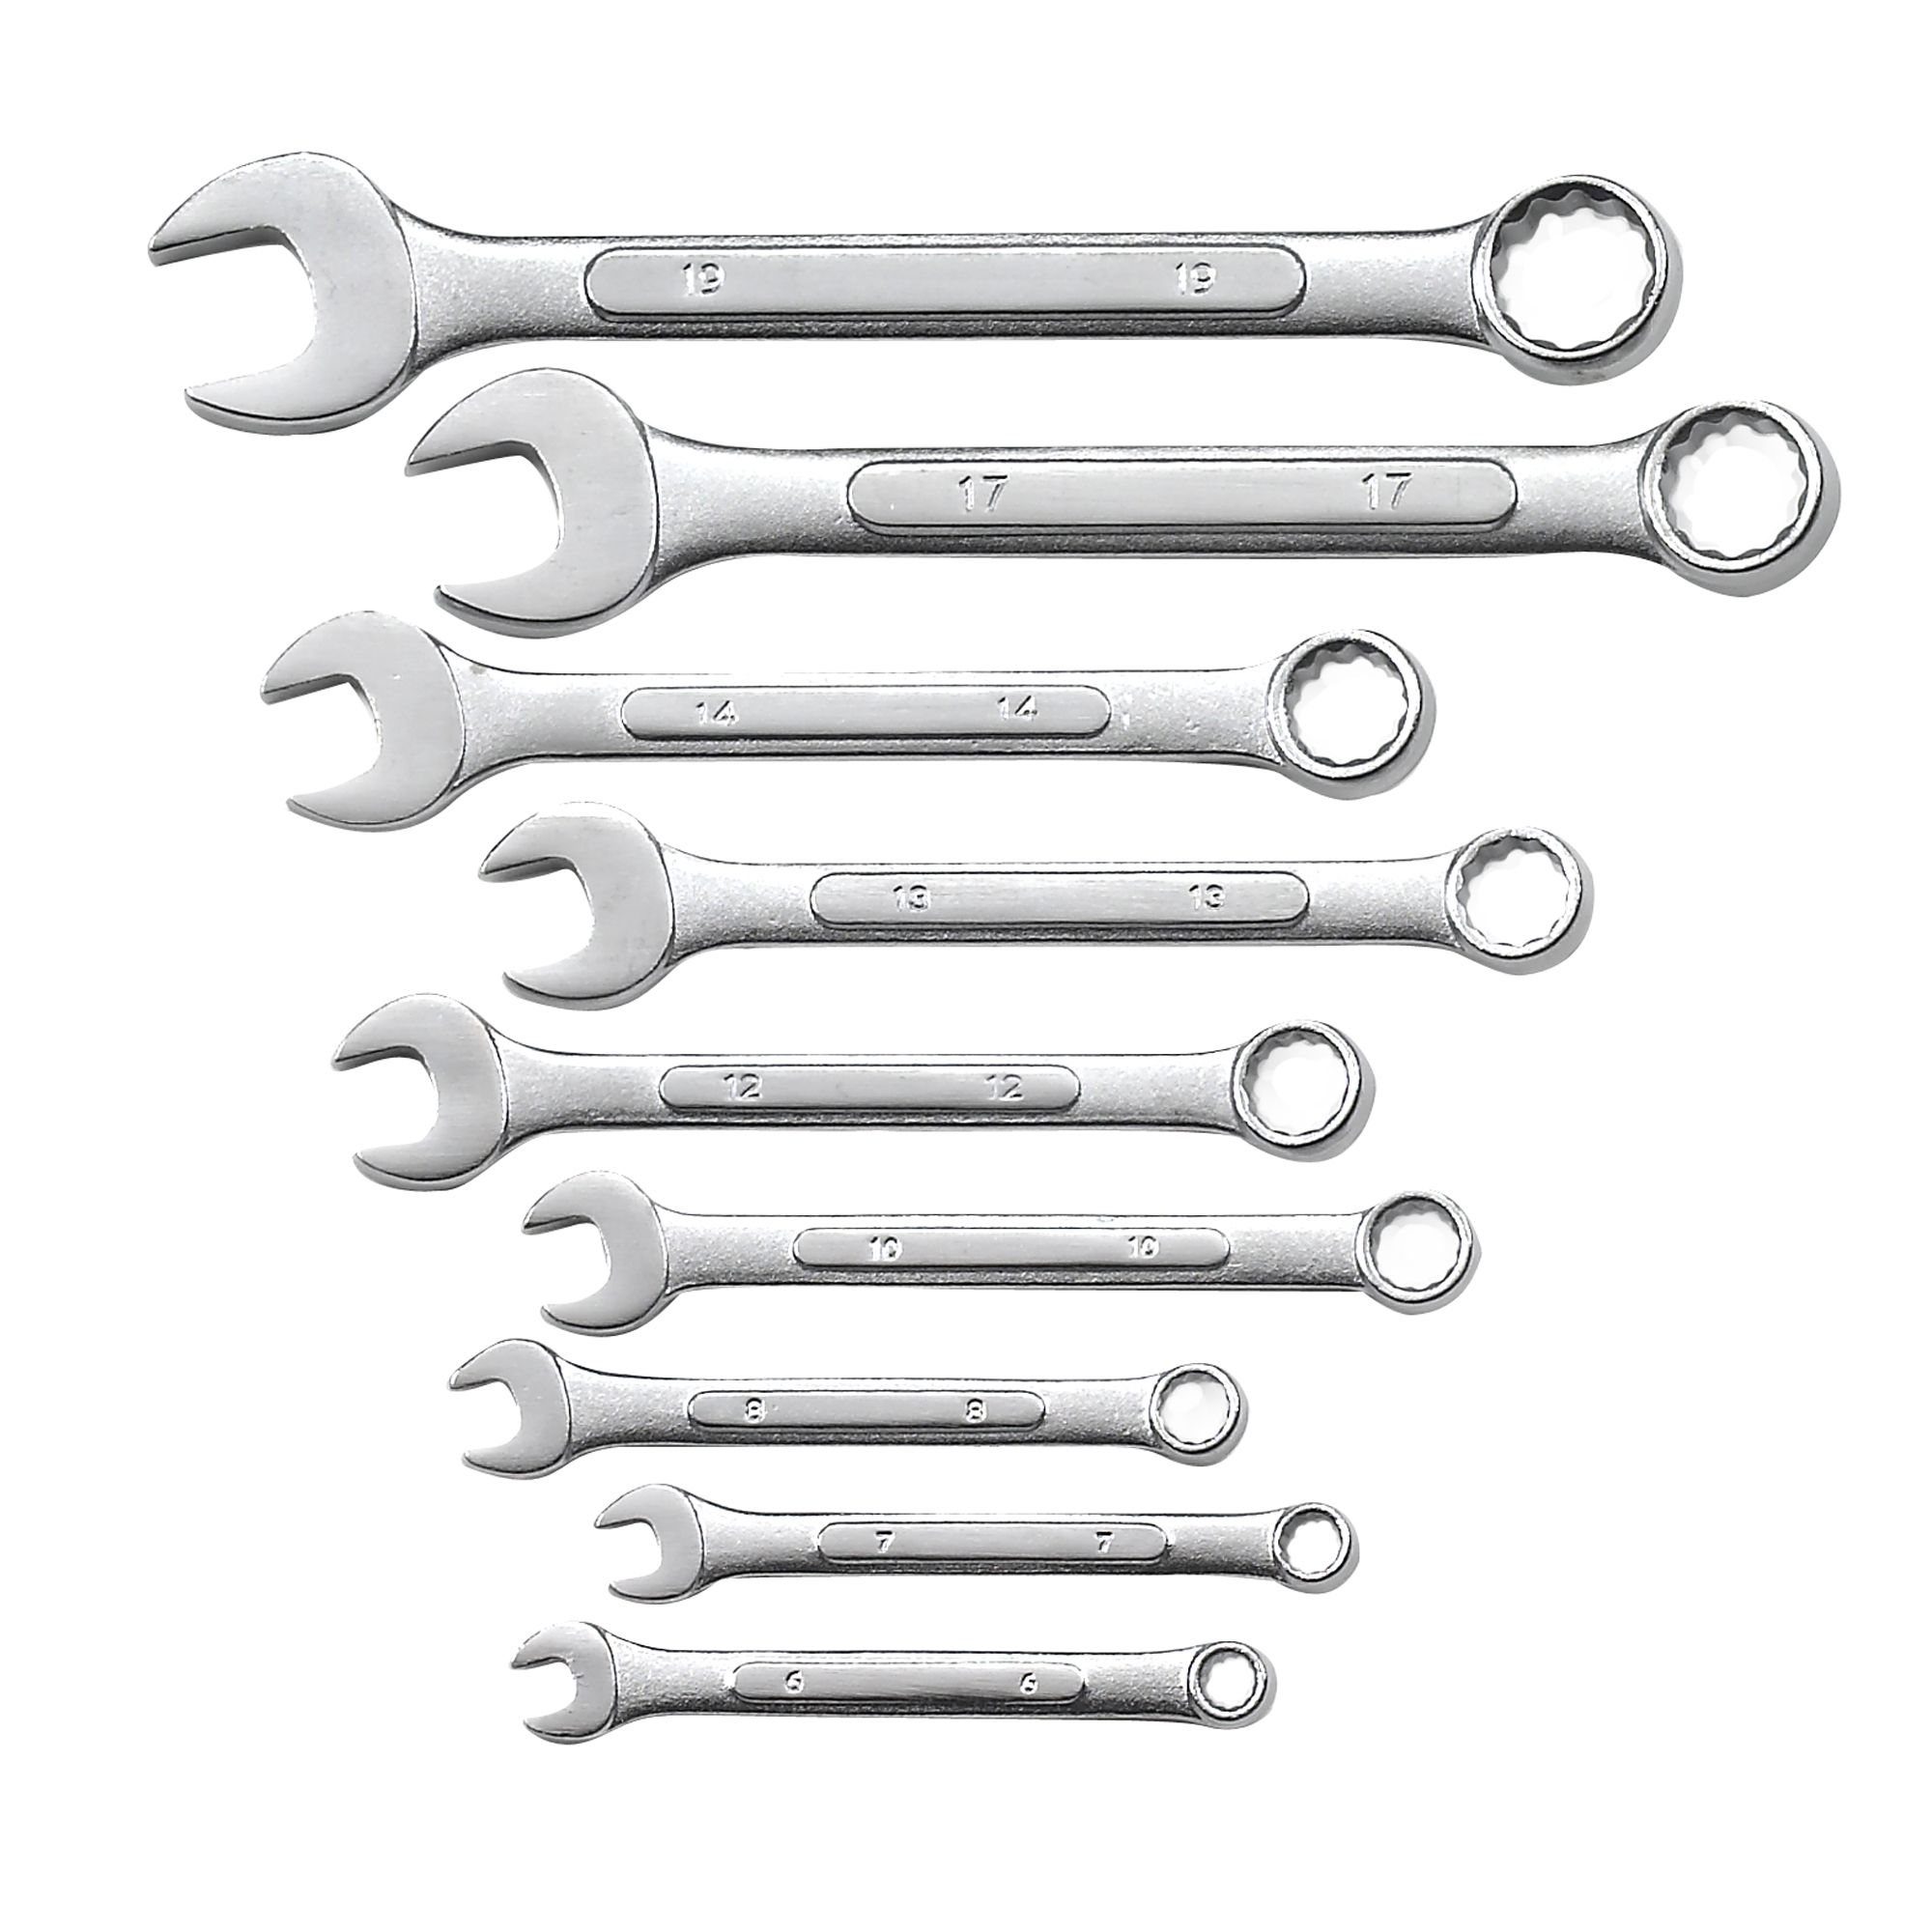 Master Forge 9 pc. Metric Combination Wrench Set